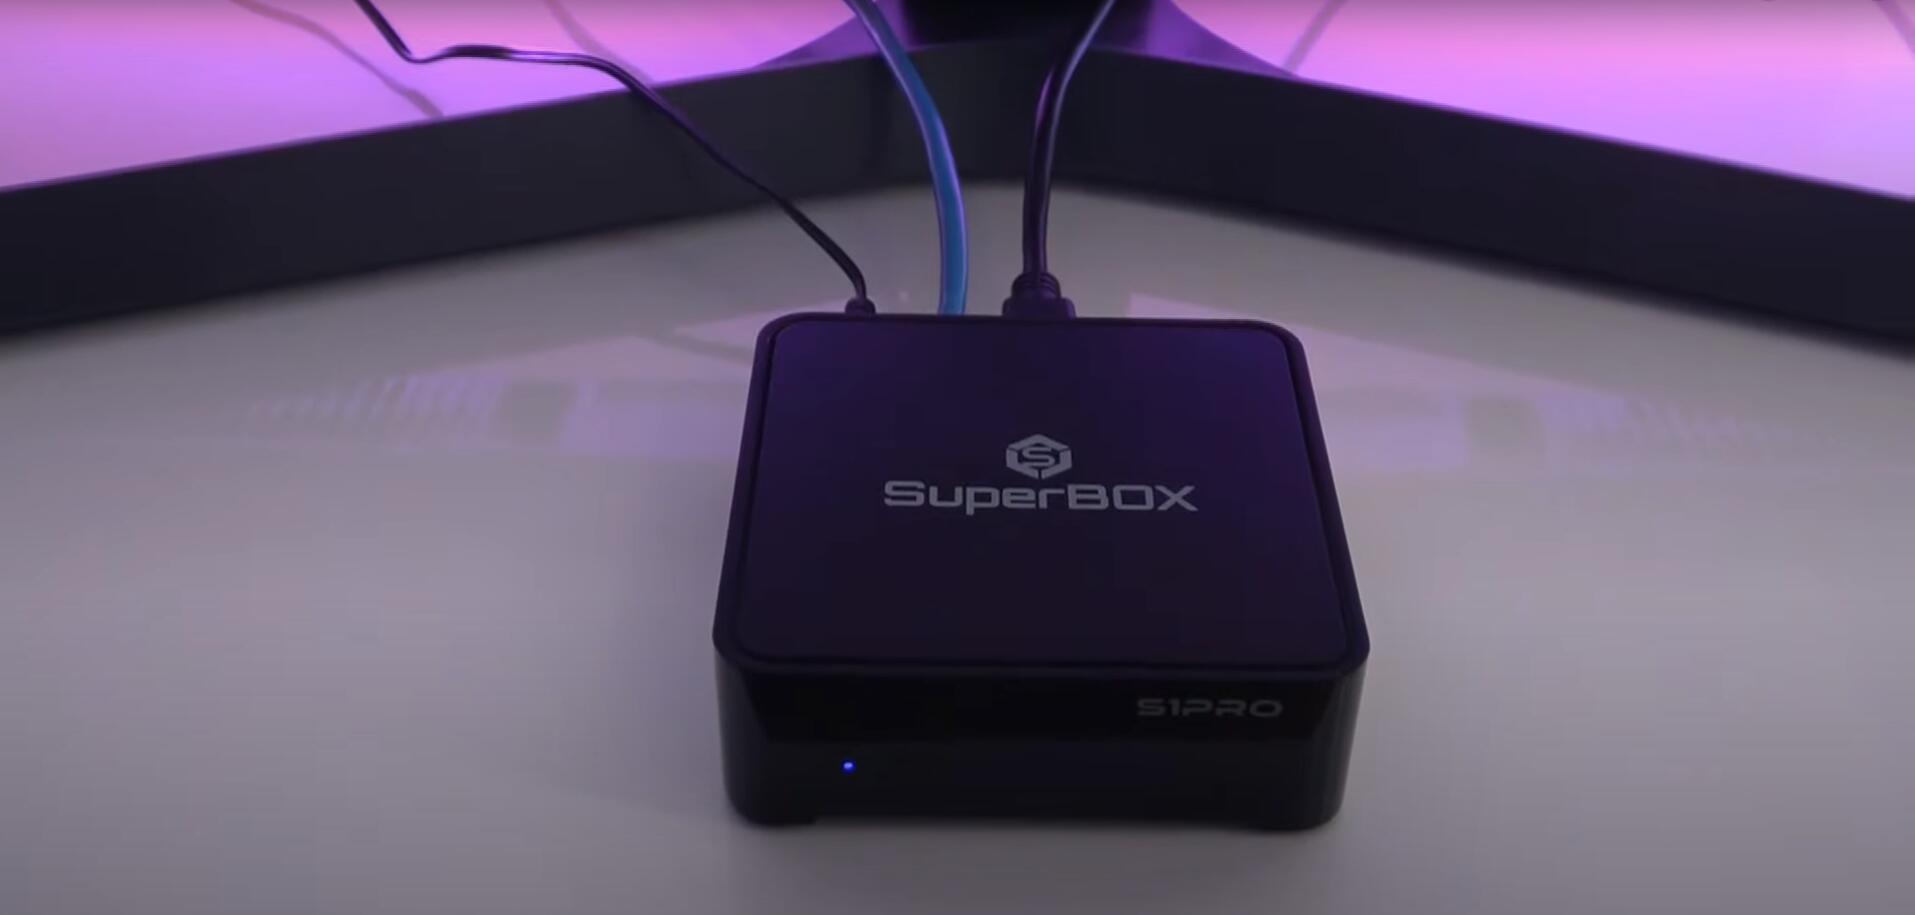 SuperBox S1 Pro Unboxing and Accessories